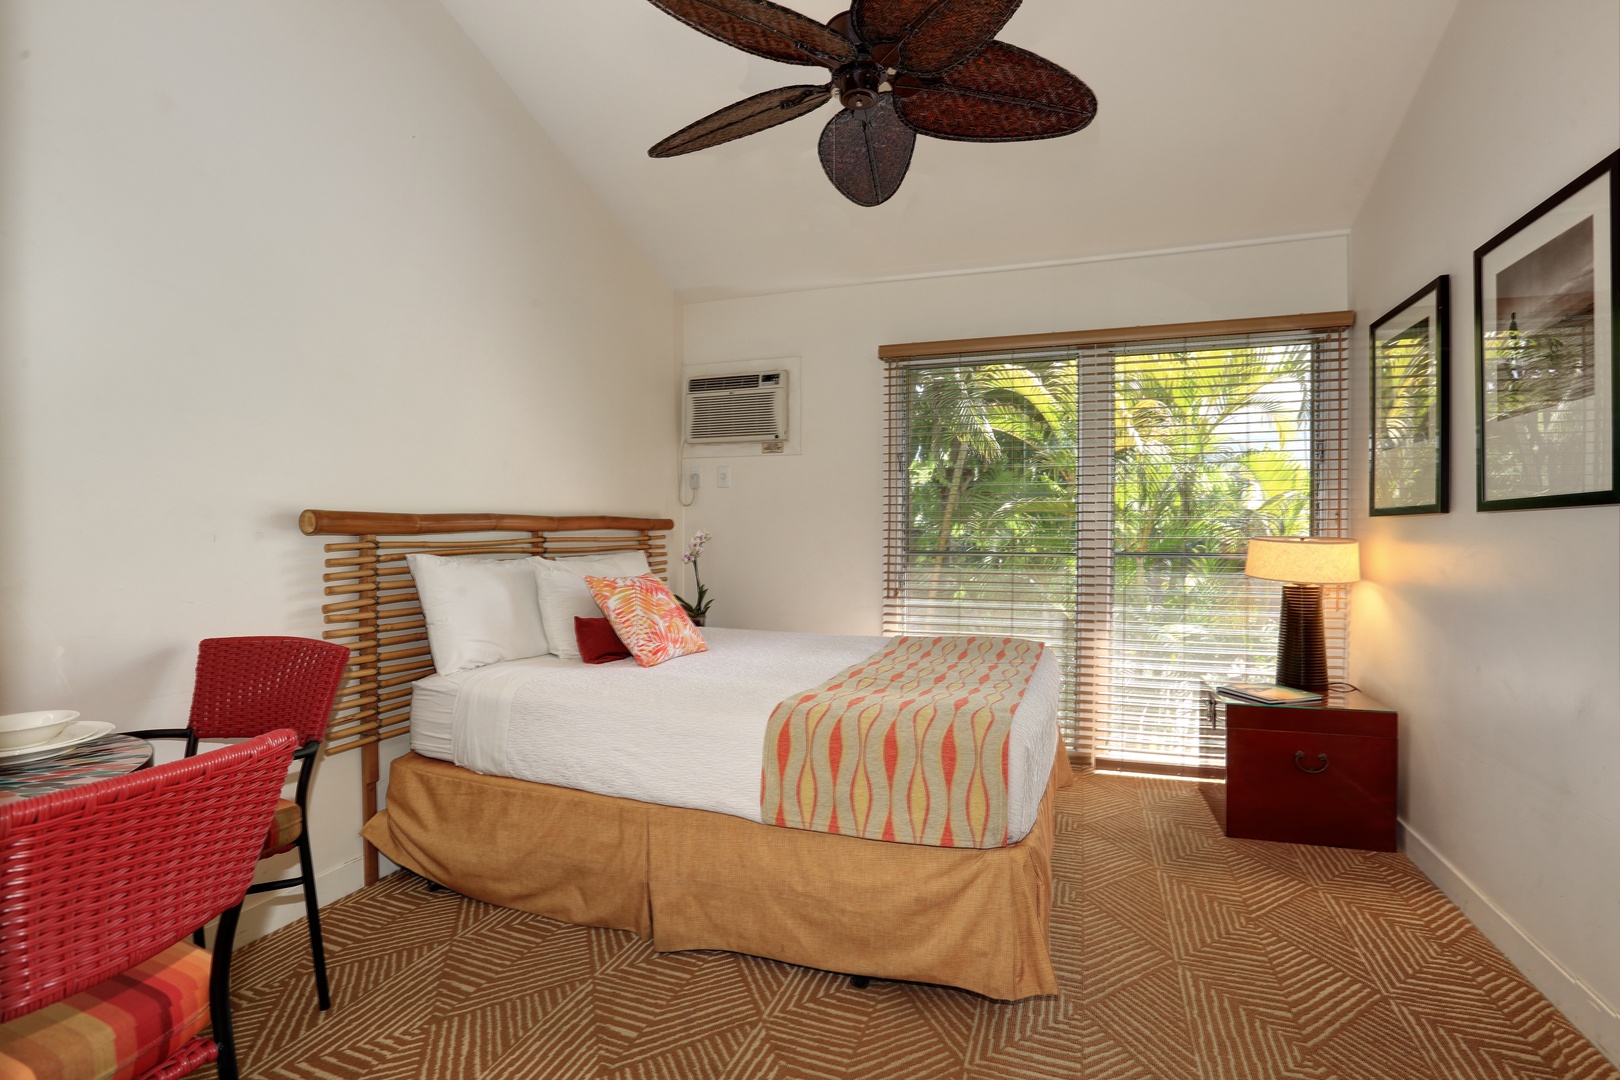 Lahaina Vacation Rentals, Aina Nalu F201 - Enjoy high ceilings and plenty of space in this comfy studio